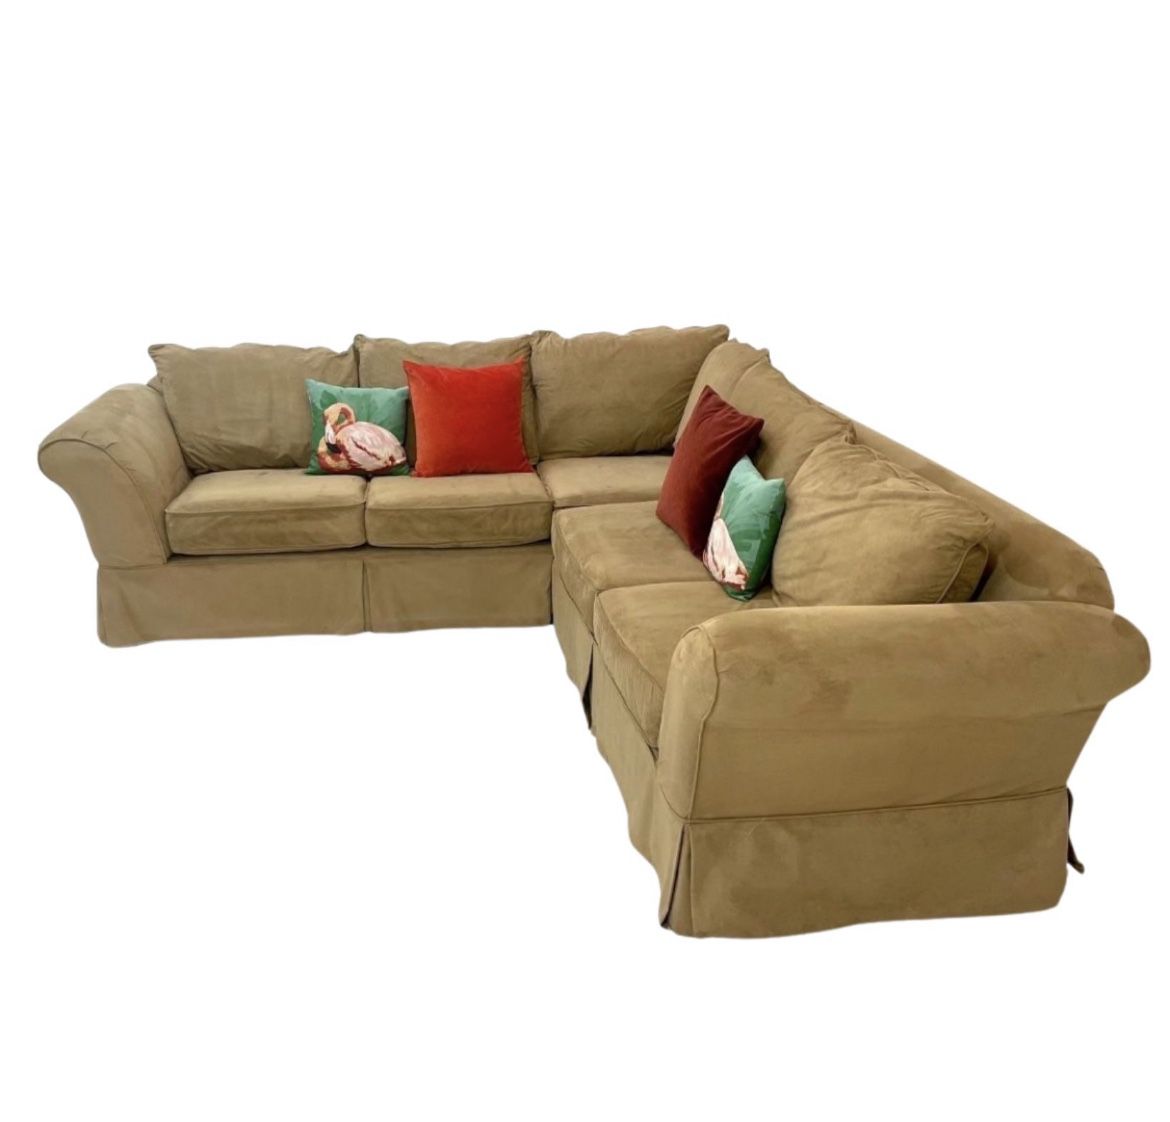 L Shaped Sleeper Sectional - FREE DELIVERY